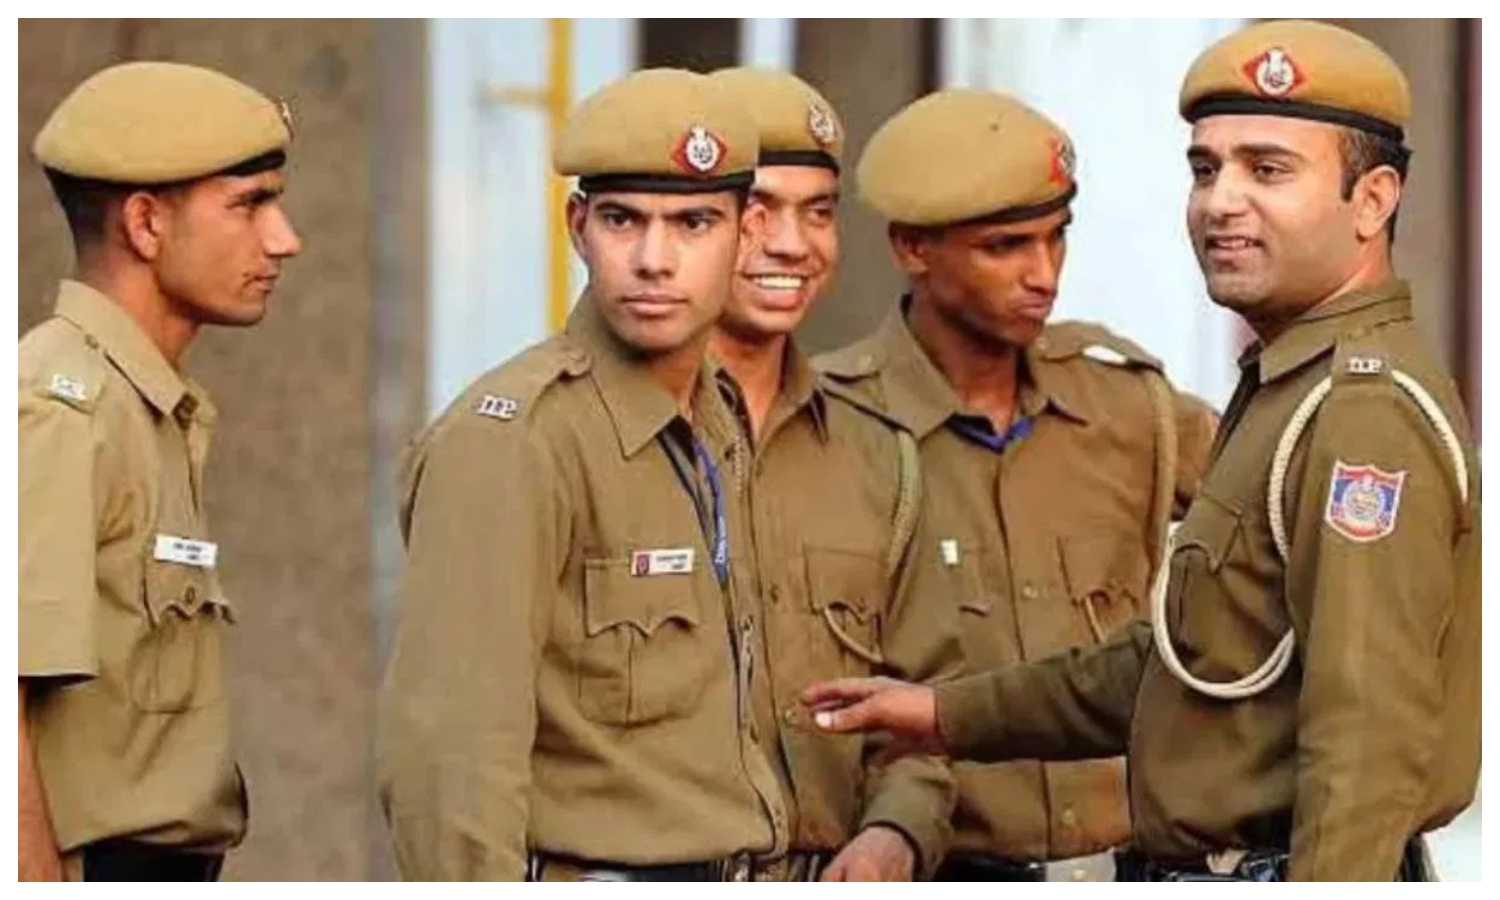 UP Police Constable Exam 2024